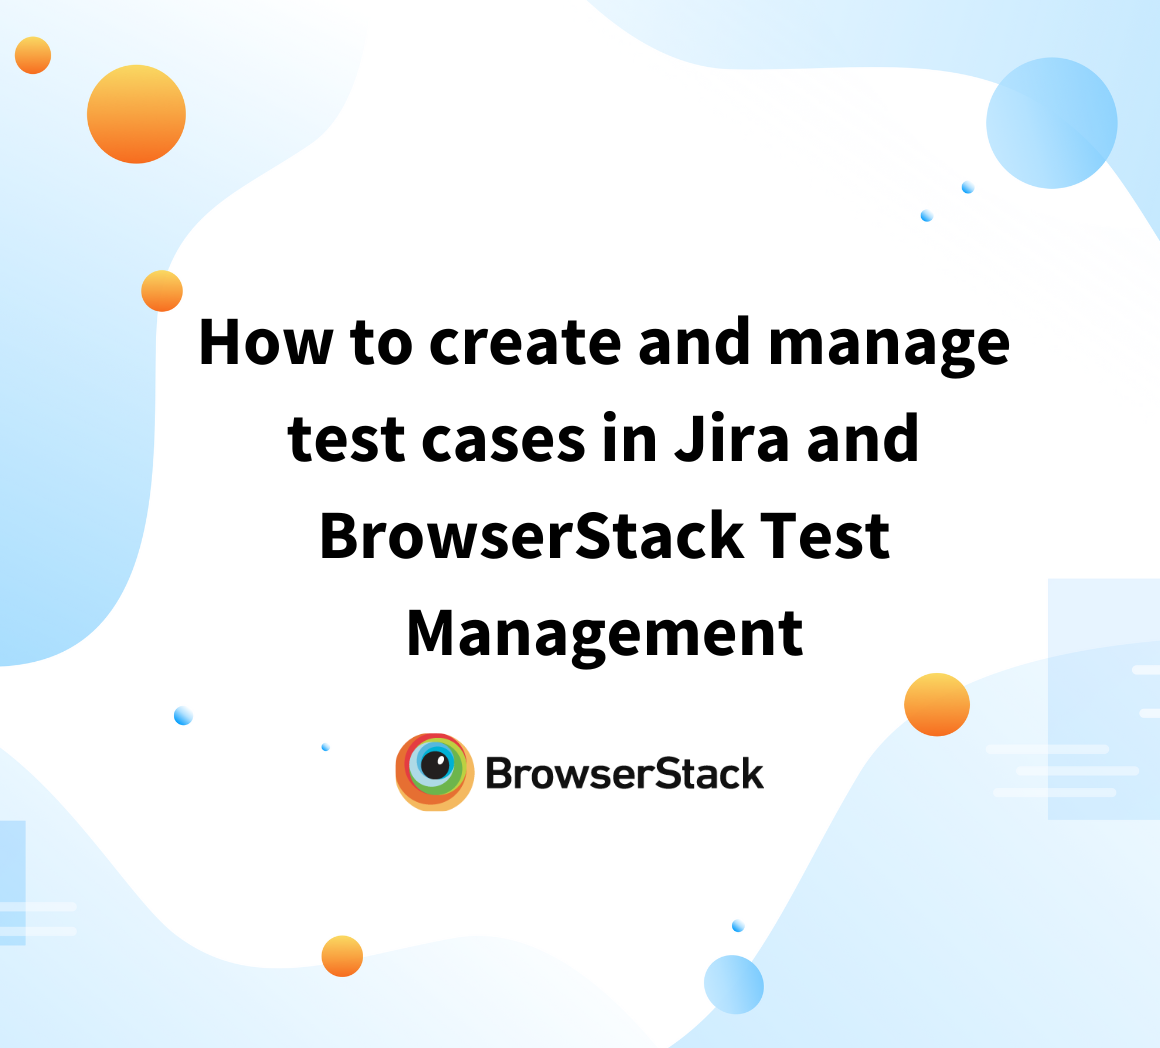 How to create and manage test cases in Jira and BrowserStack Test Management